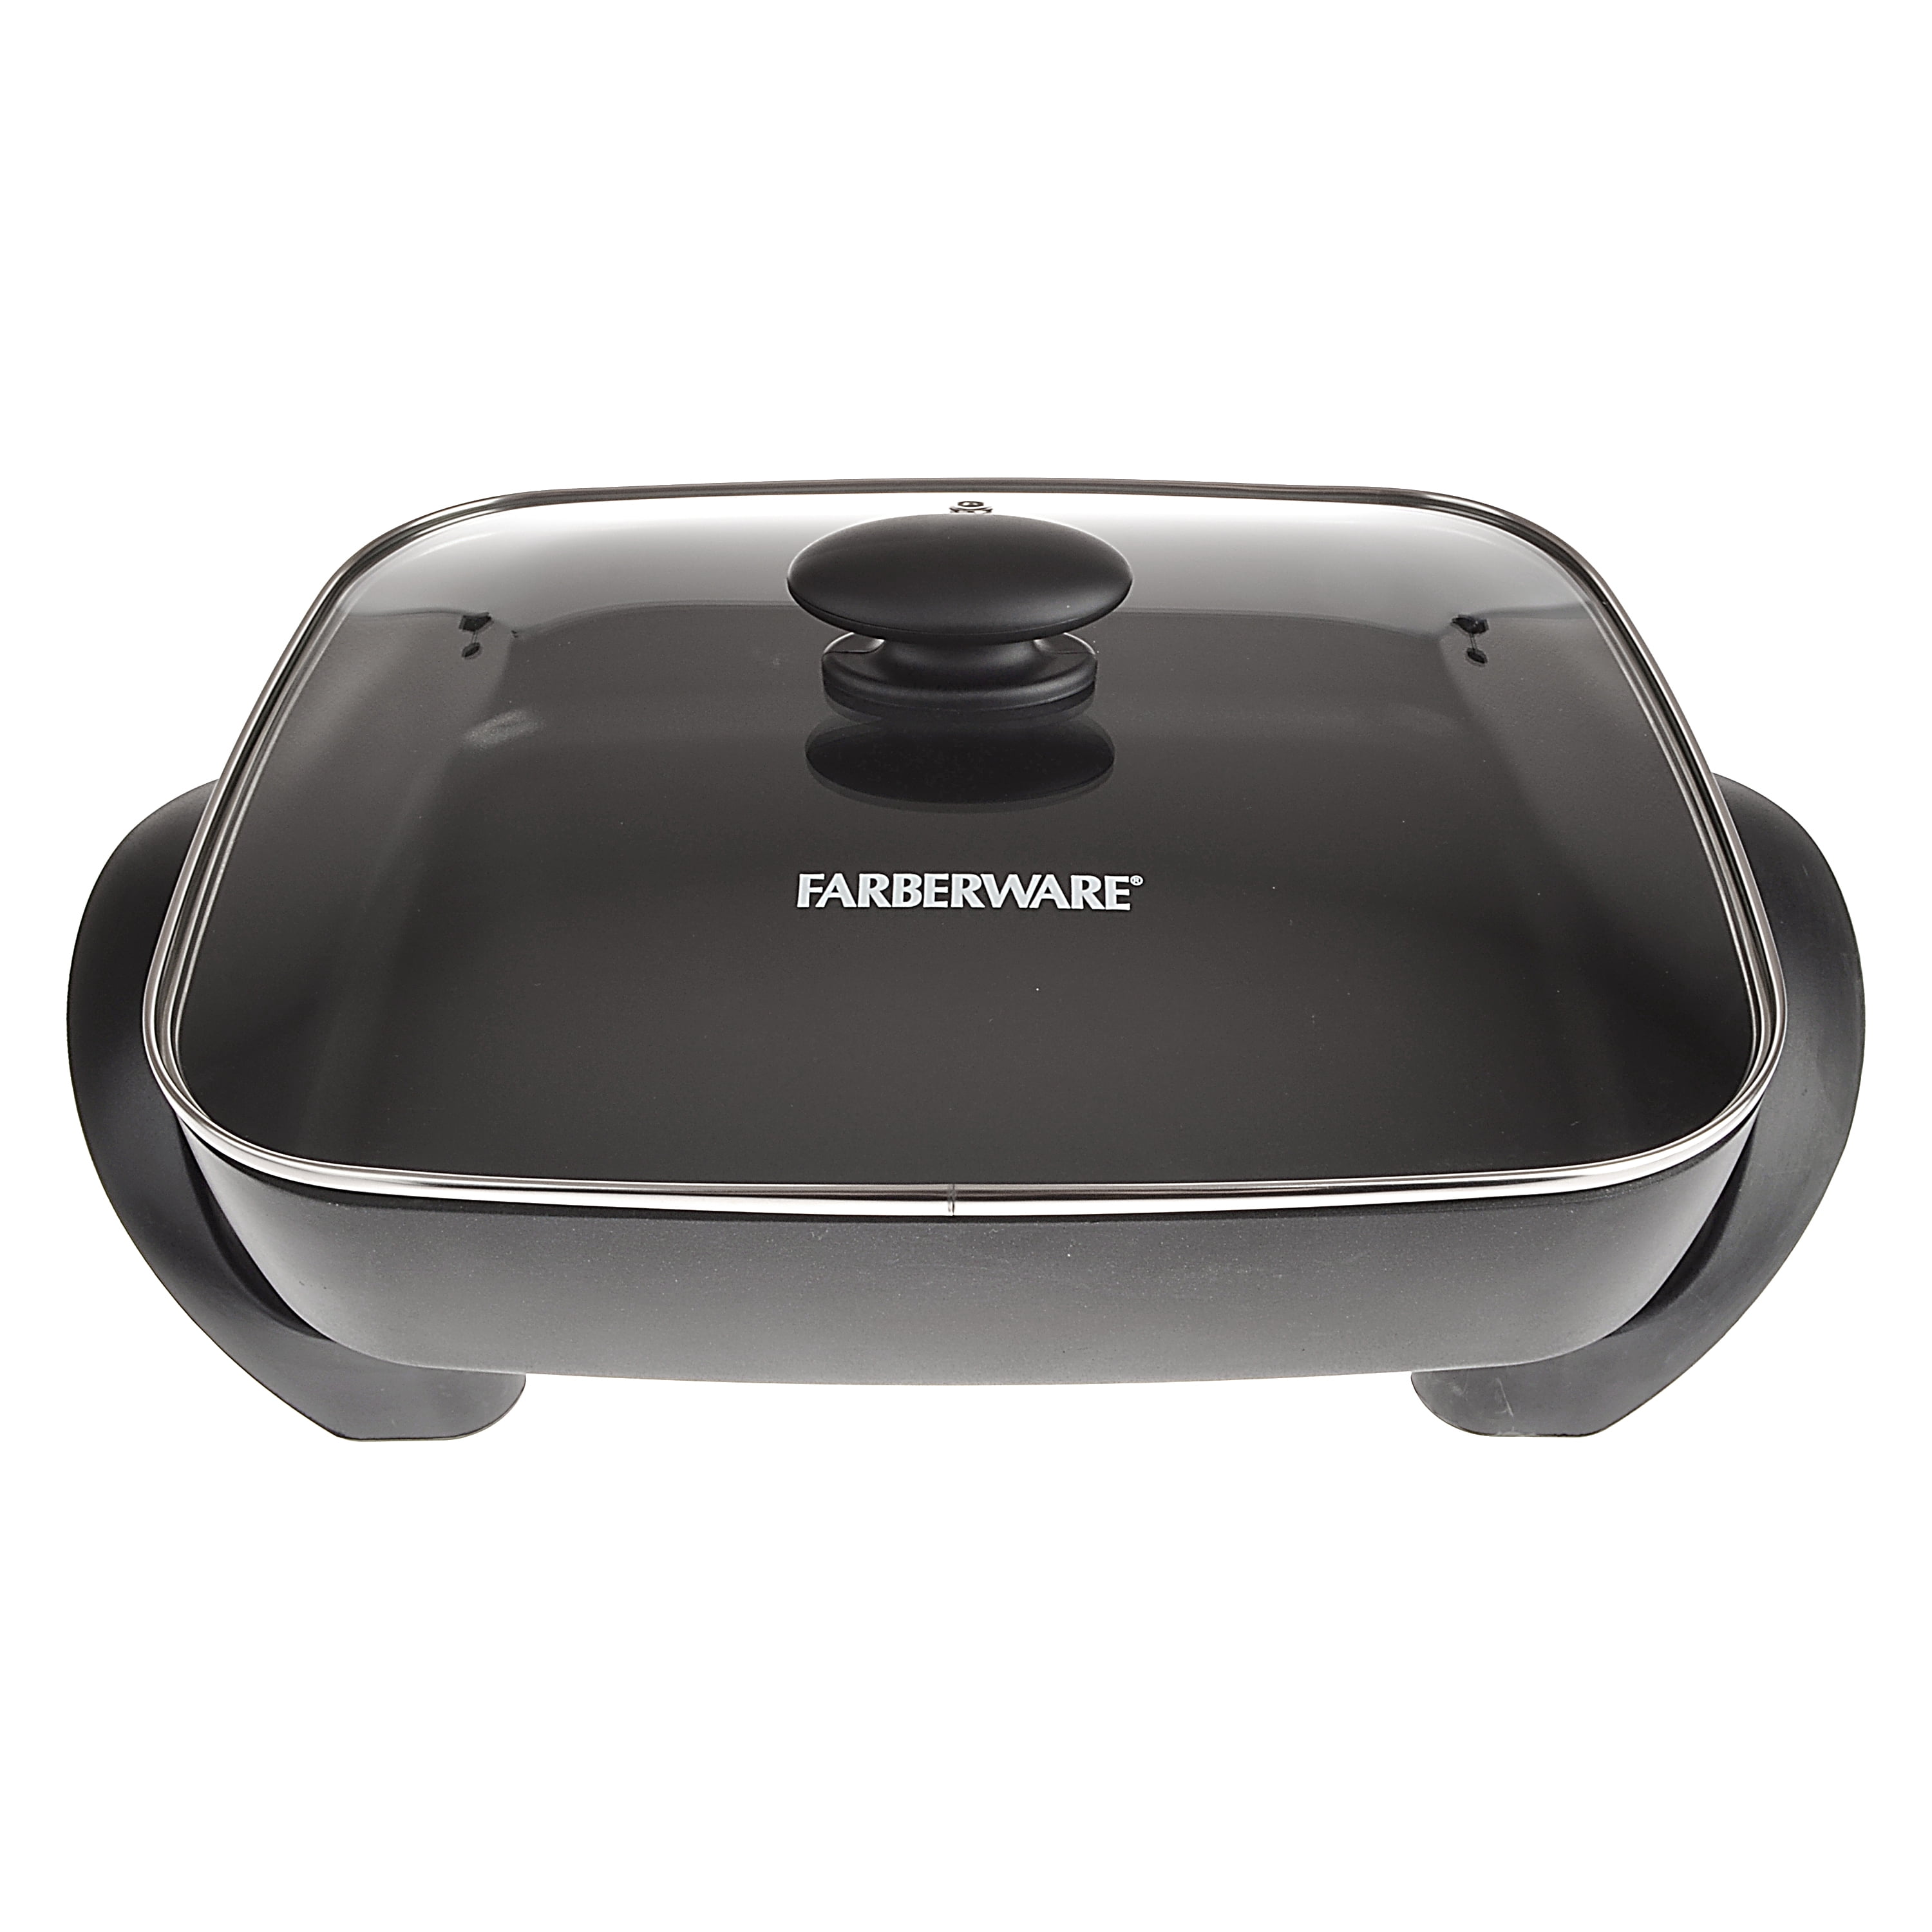 Farberware electric fry pan - appliances - by owner - sale - craigslist